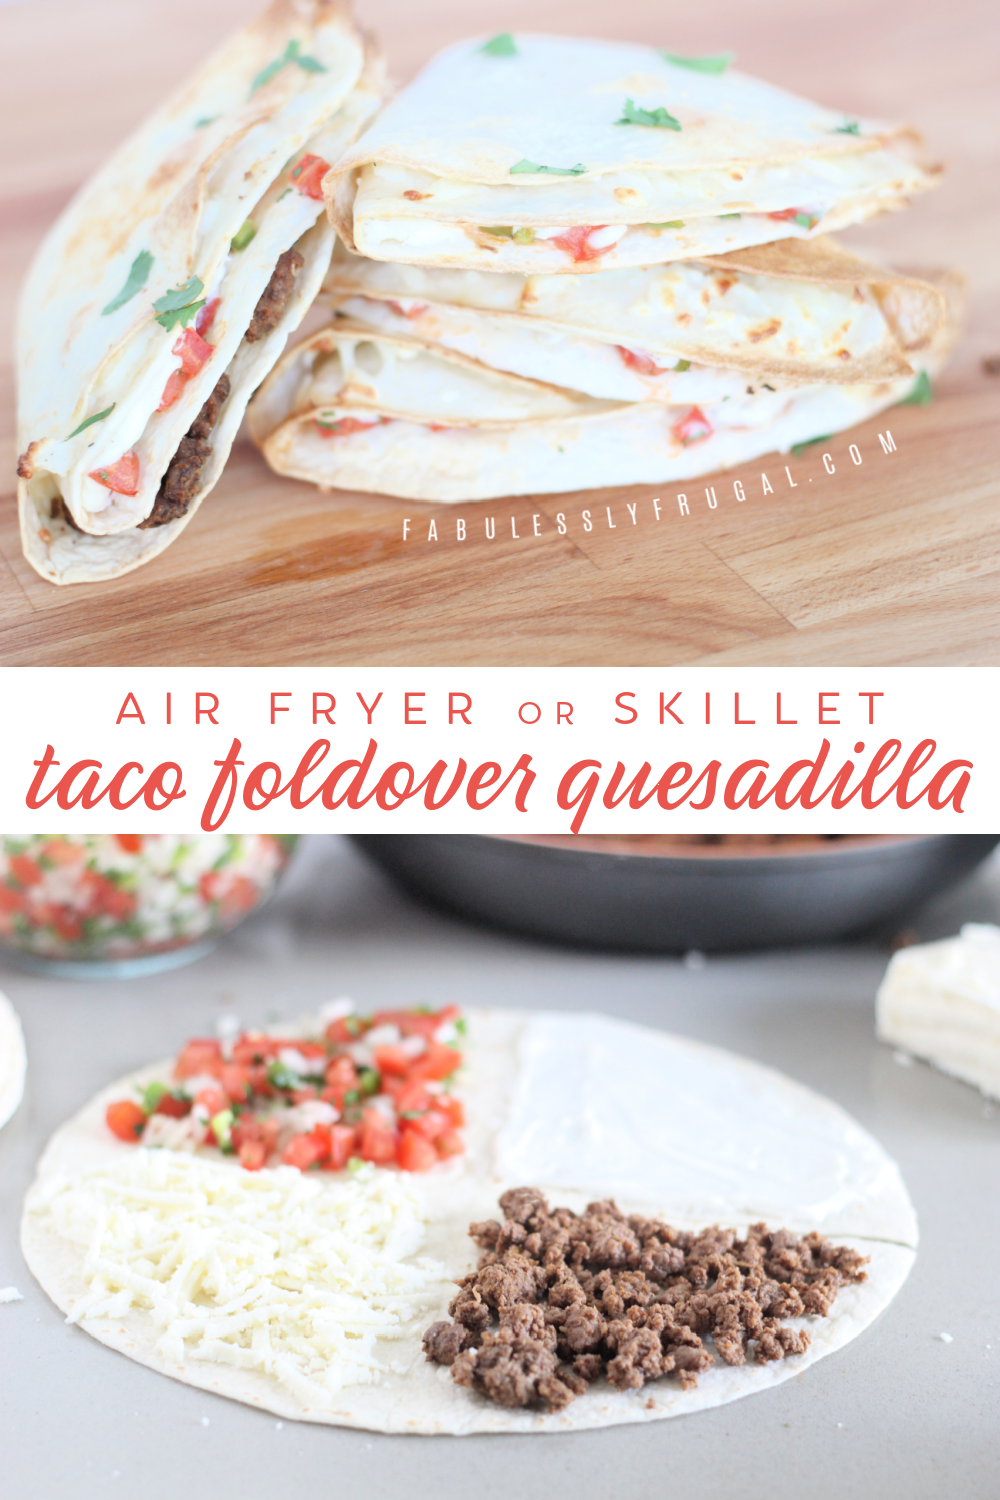 how to make taco foldover quesadilla in air fryer